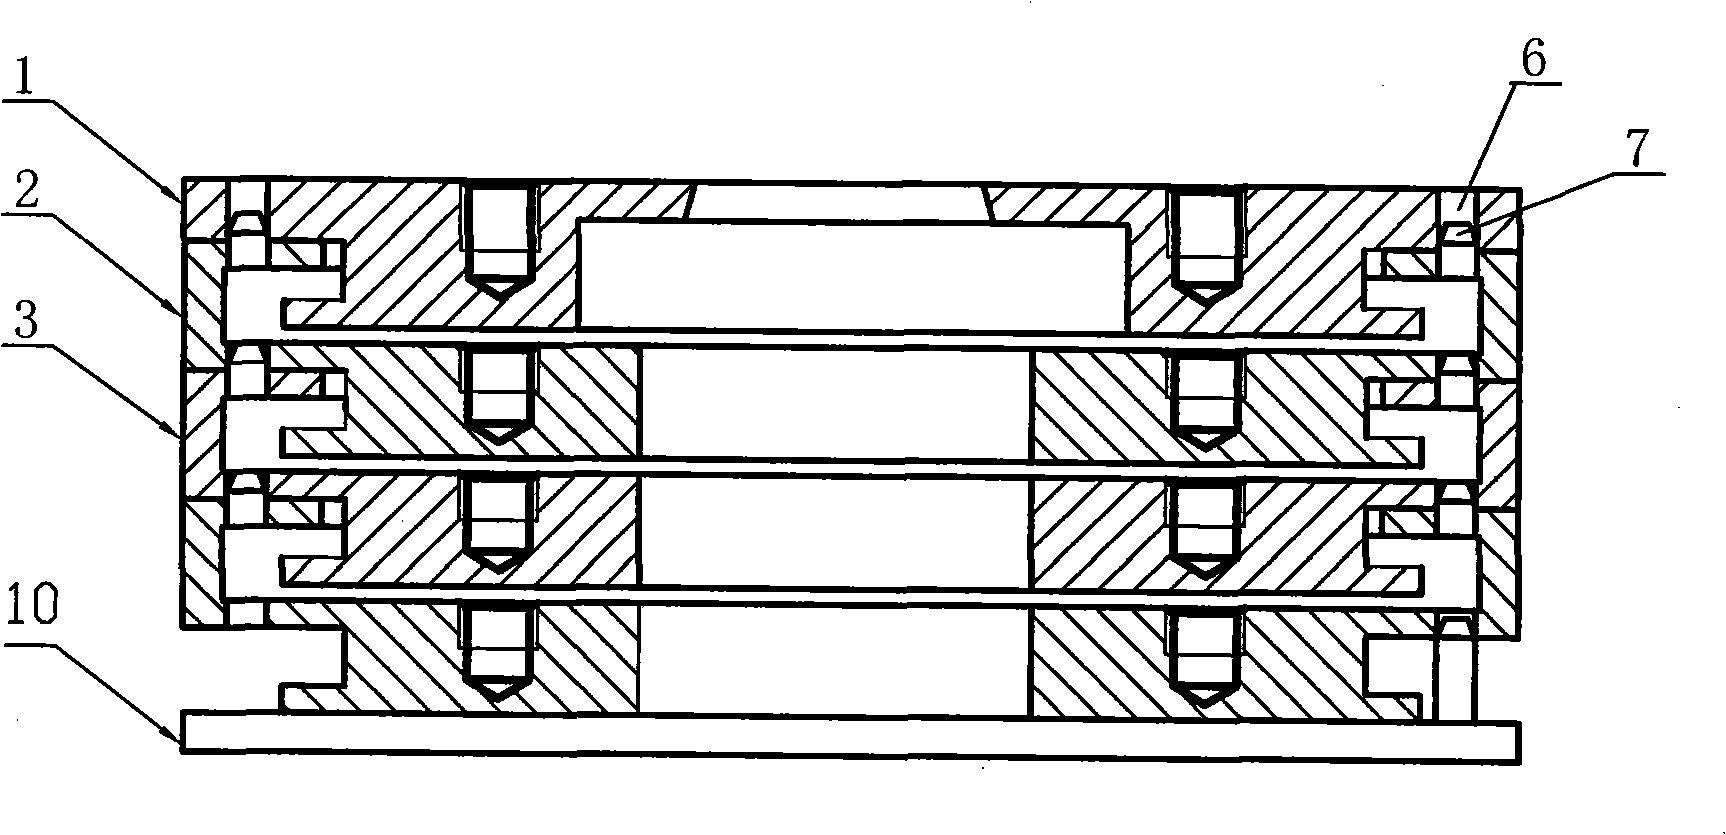 Weights of standard machine loading device